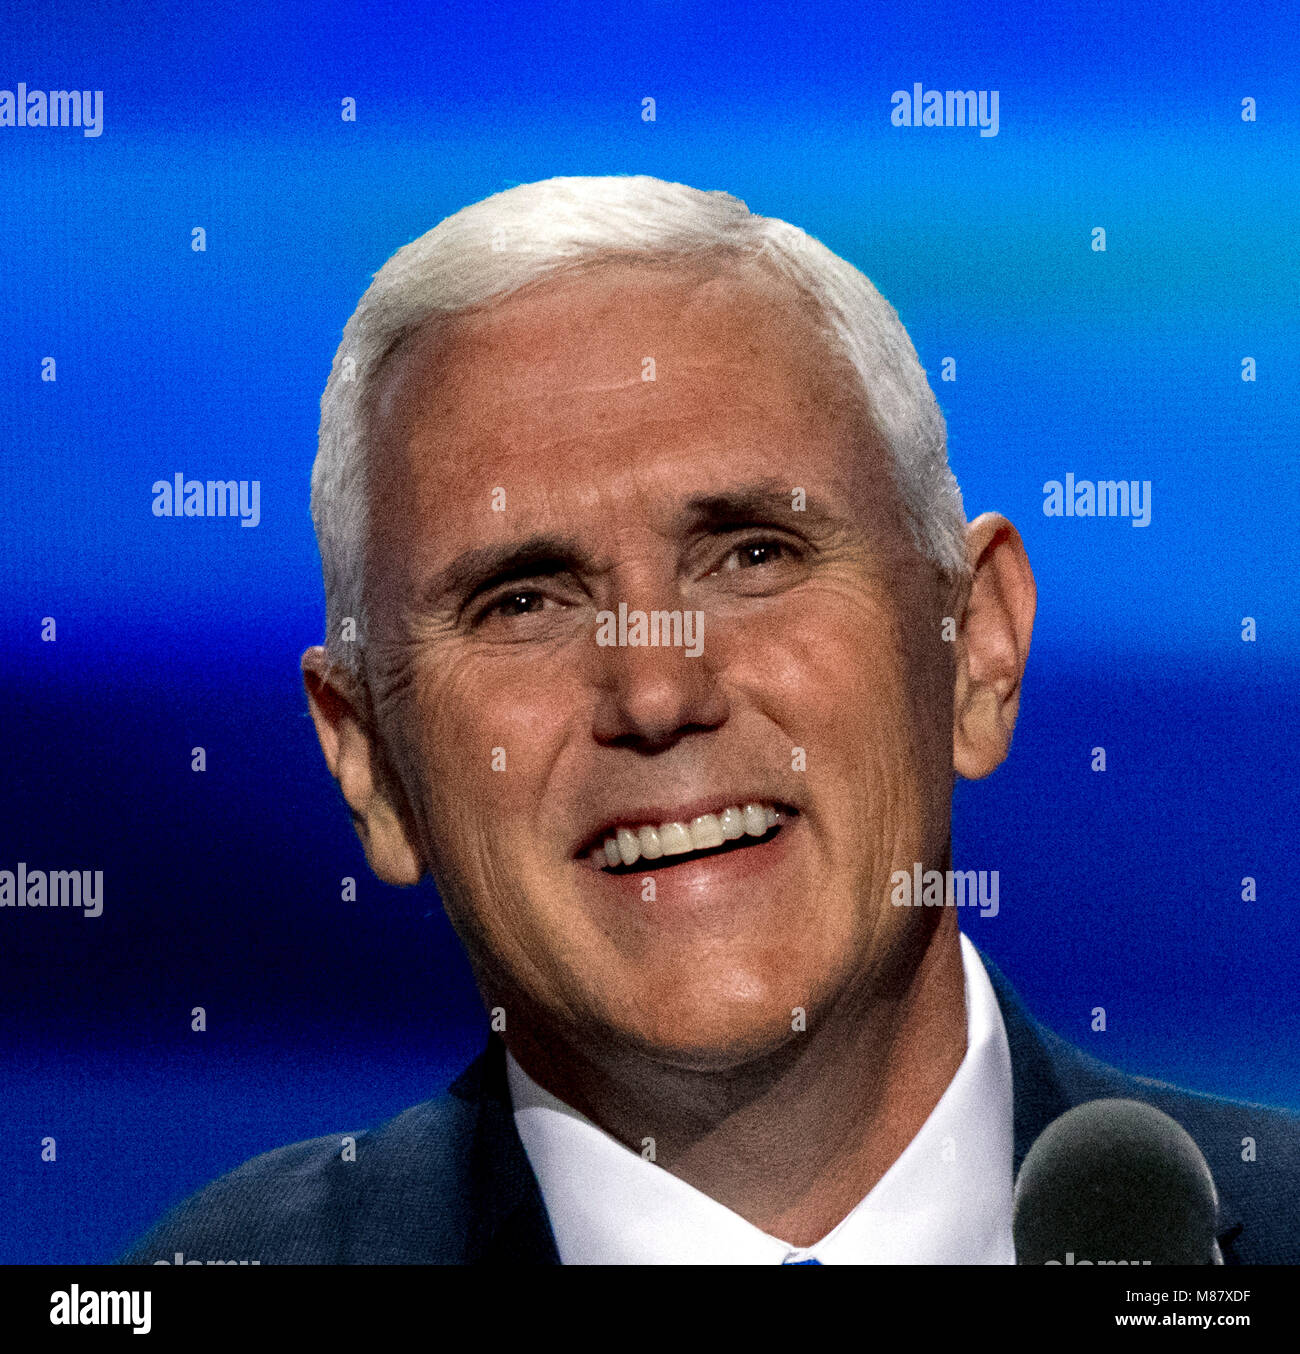 Cleveland Ohio, USA, 20th July, 2016. Republican Governor and now VIce-Presidential candidate Michael 'Mike' Pence addresses the Republican National Convention in the Quicken Arena. Mark Reinstein/MediaPunch Stock Photo